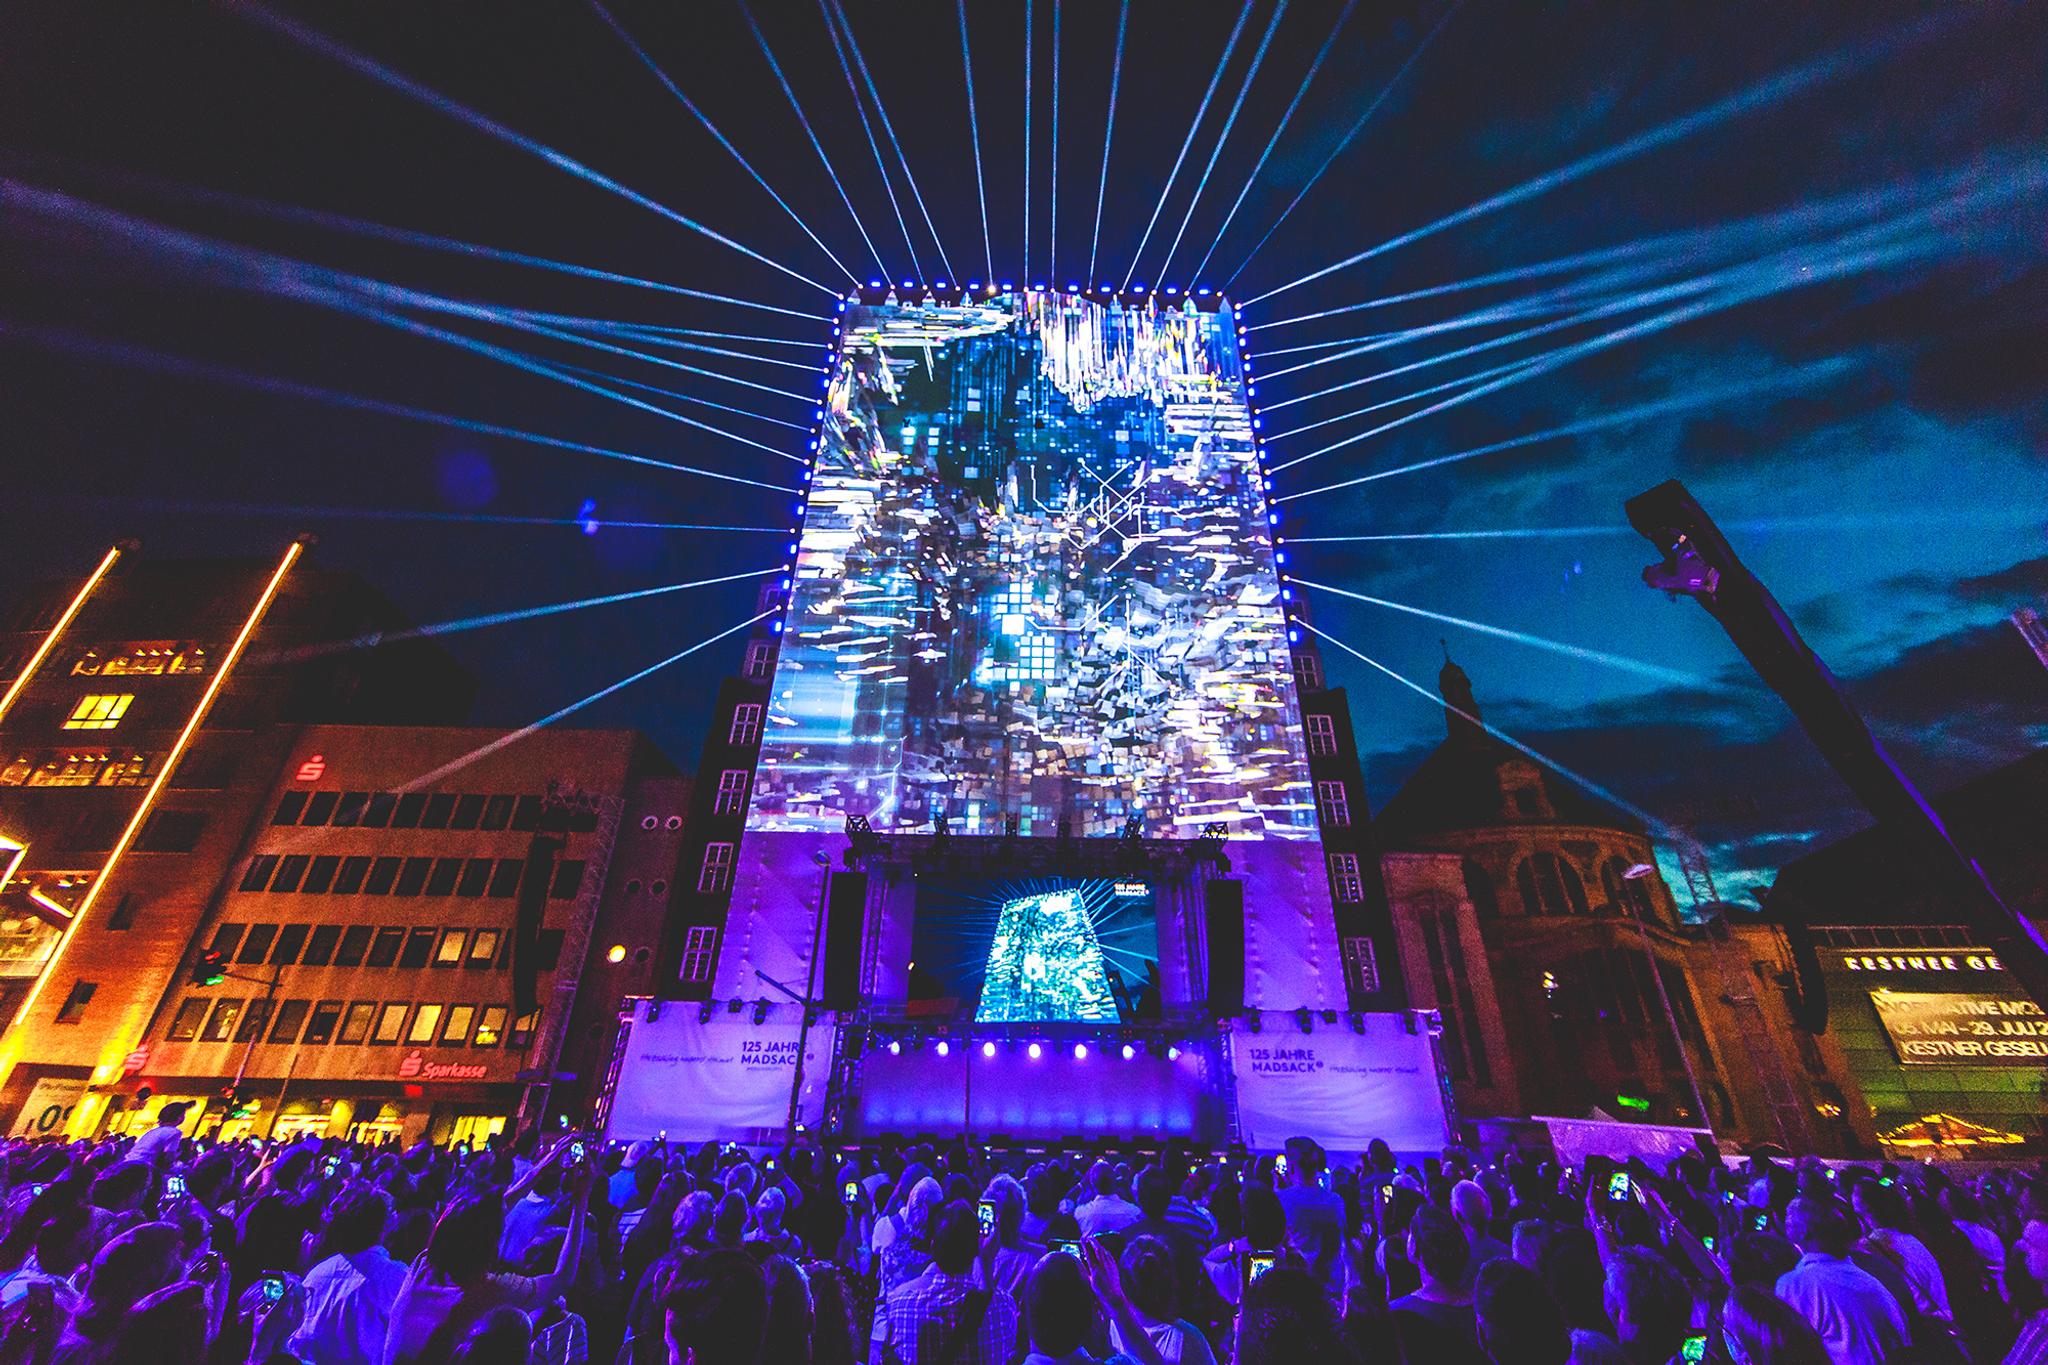 Video mapping of glitchy looking blue cubes on a large vertical stage. A large crowd watches outdoors.